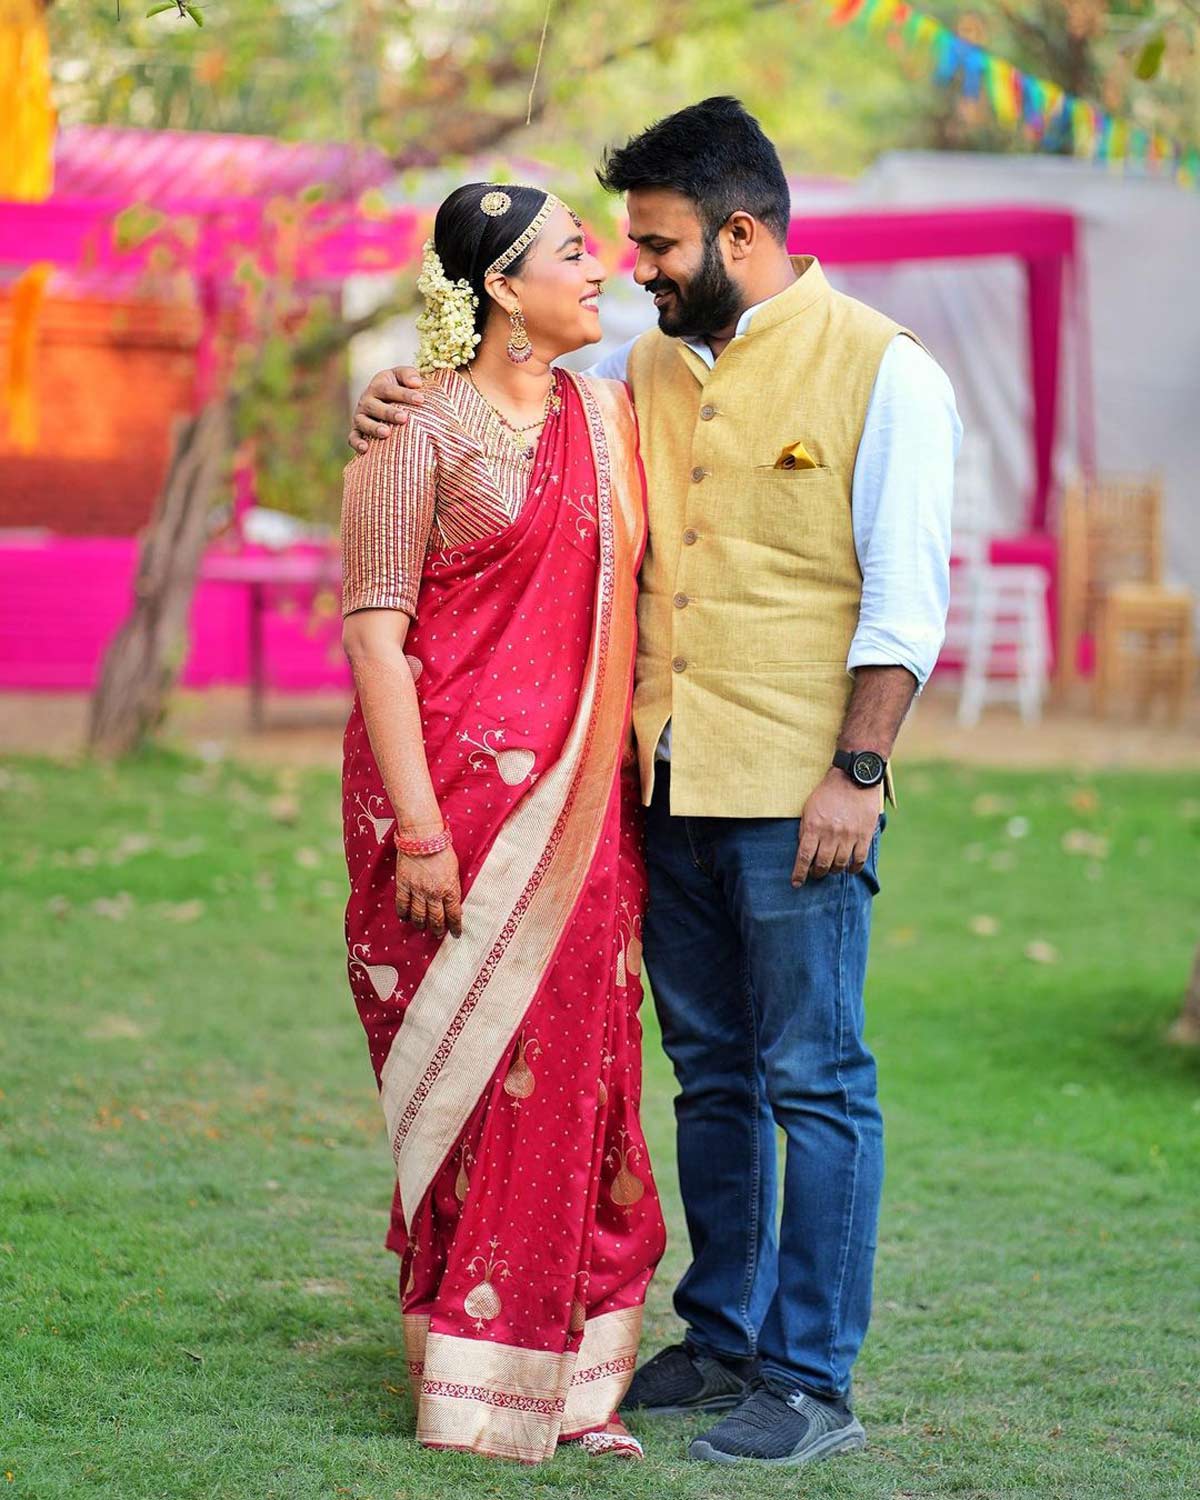 More Pictures From Swara Bhasker’s Dreamy Wedding